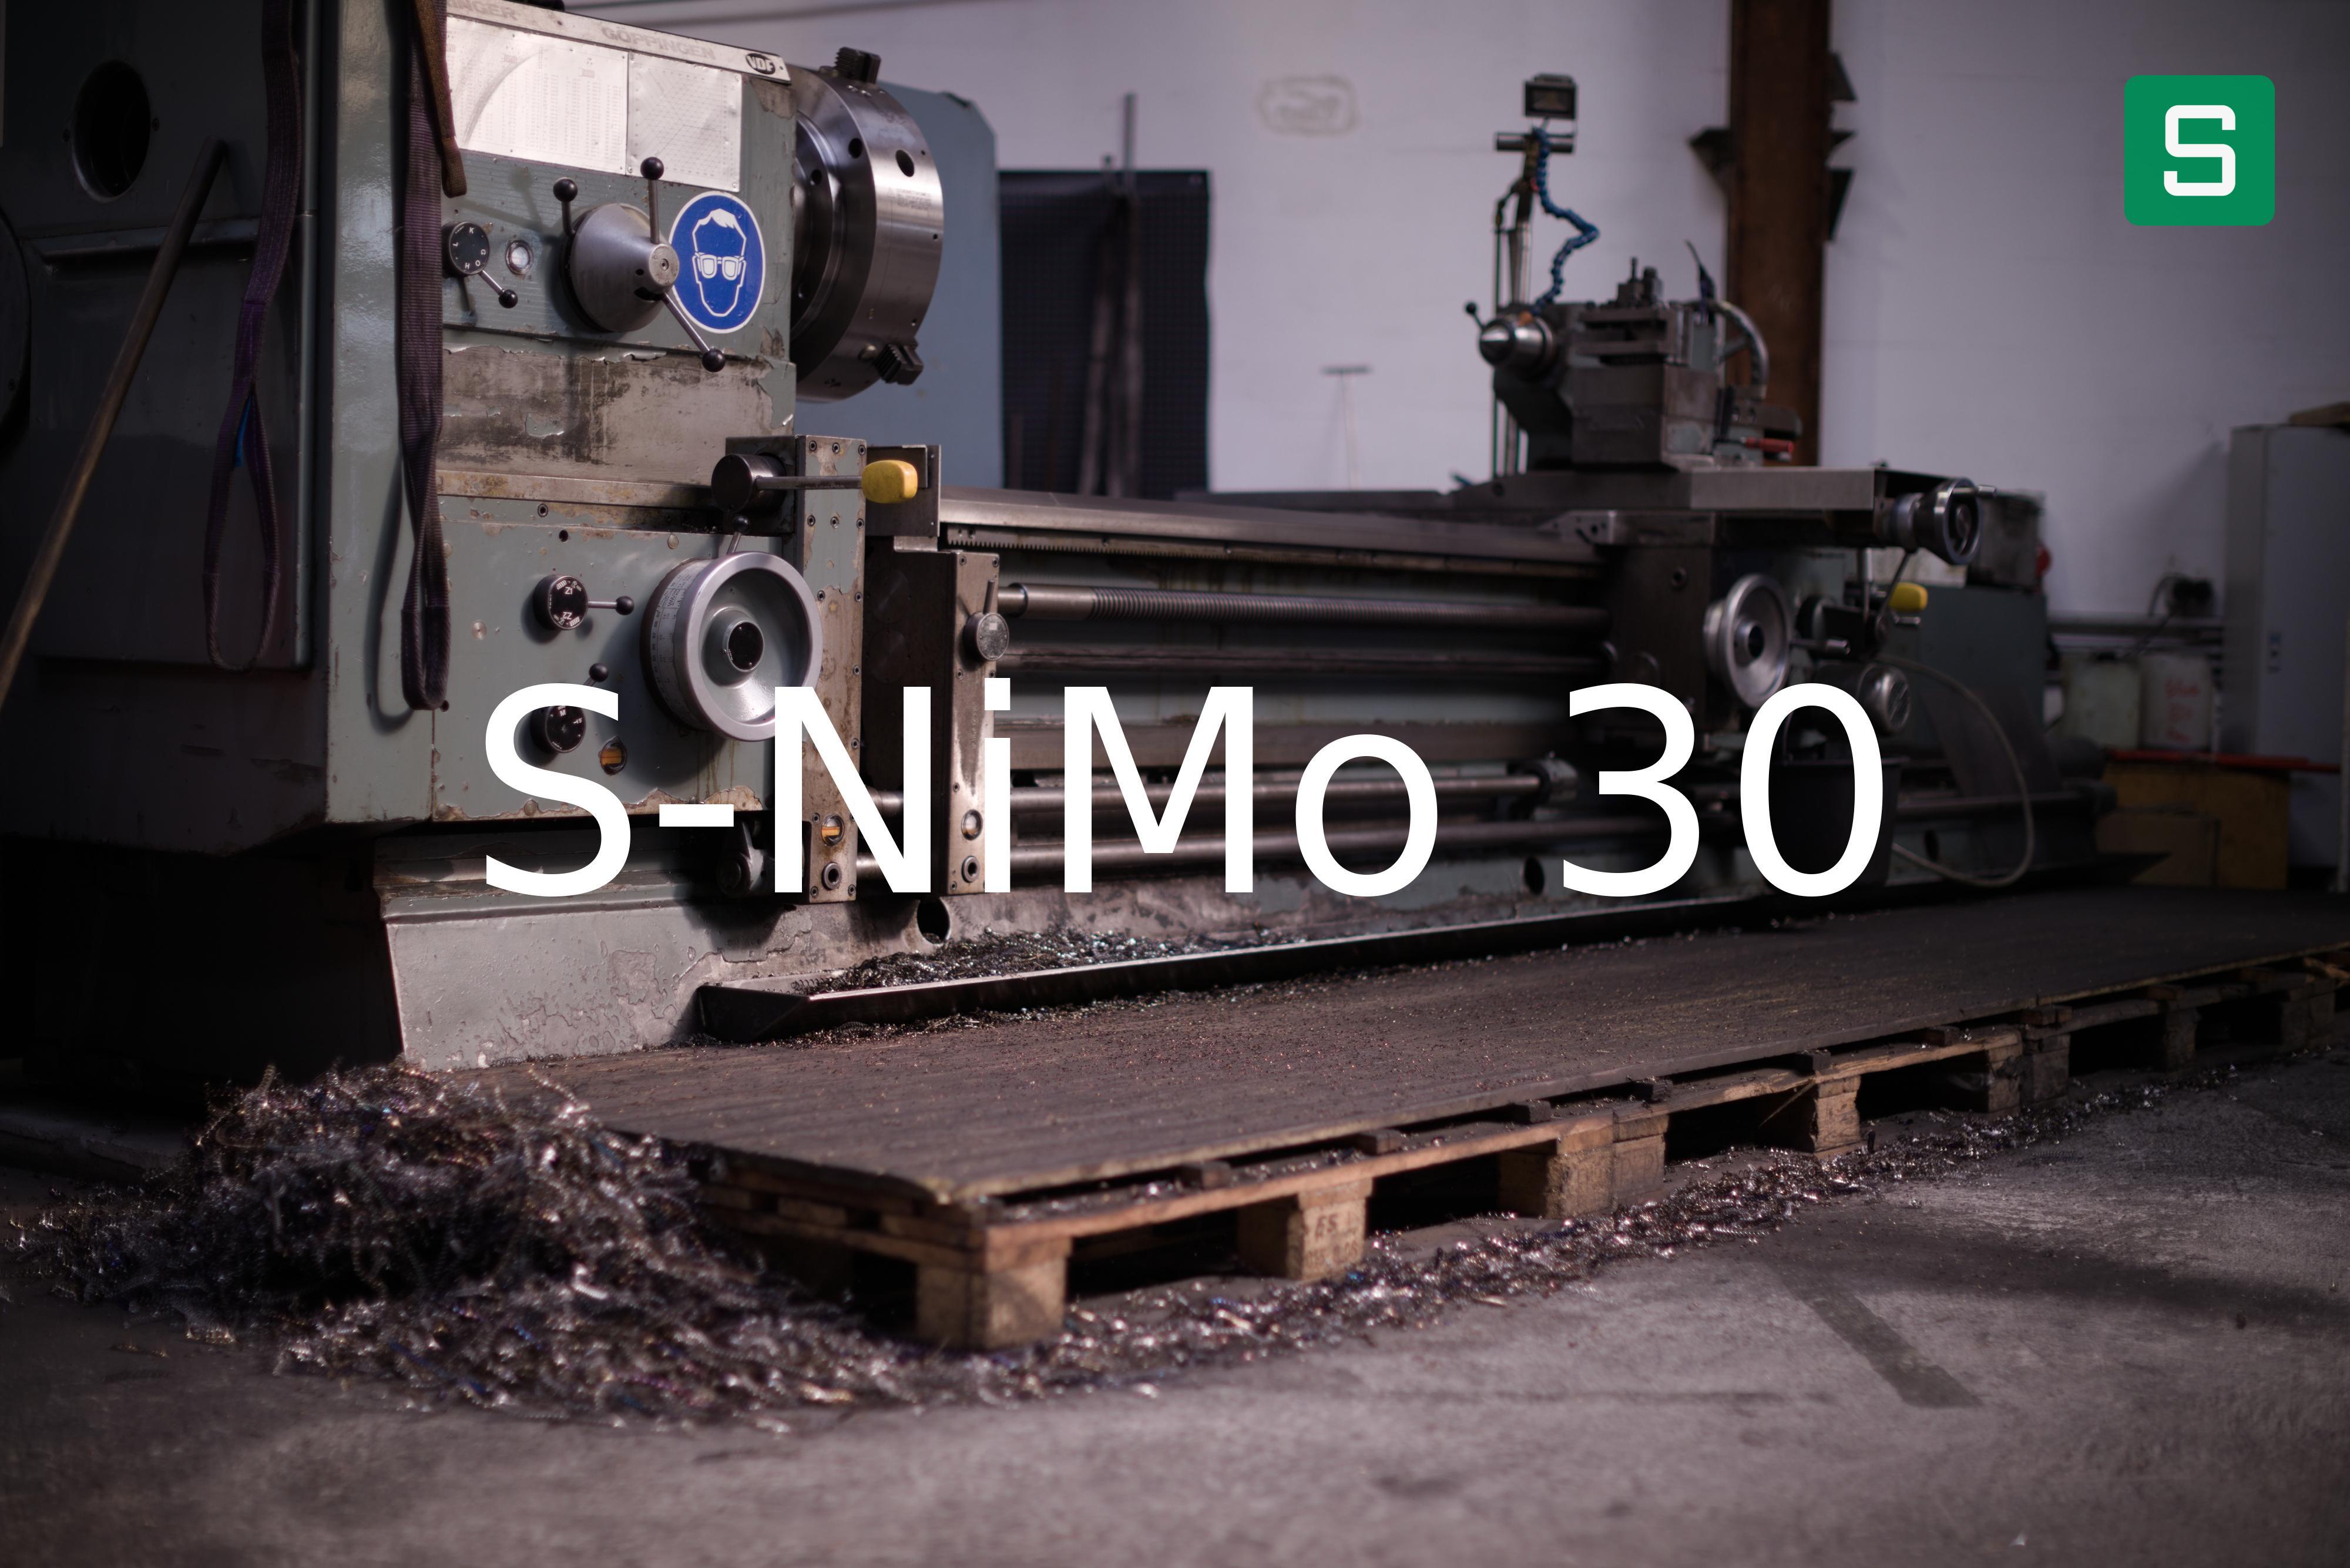 Steel Material: S-NiMo 30